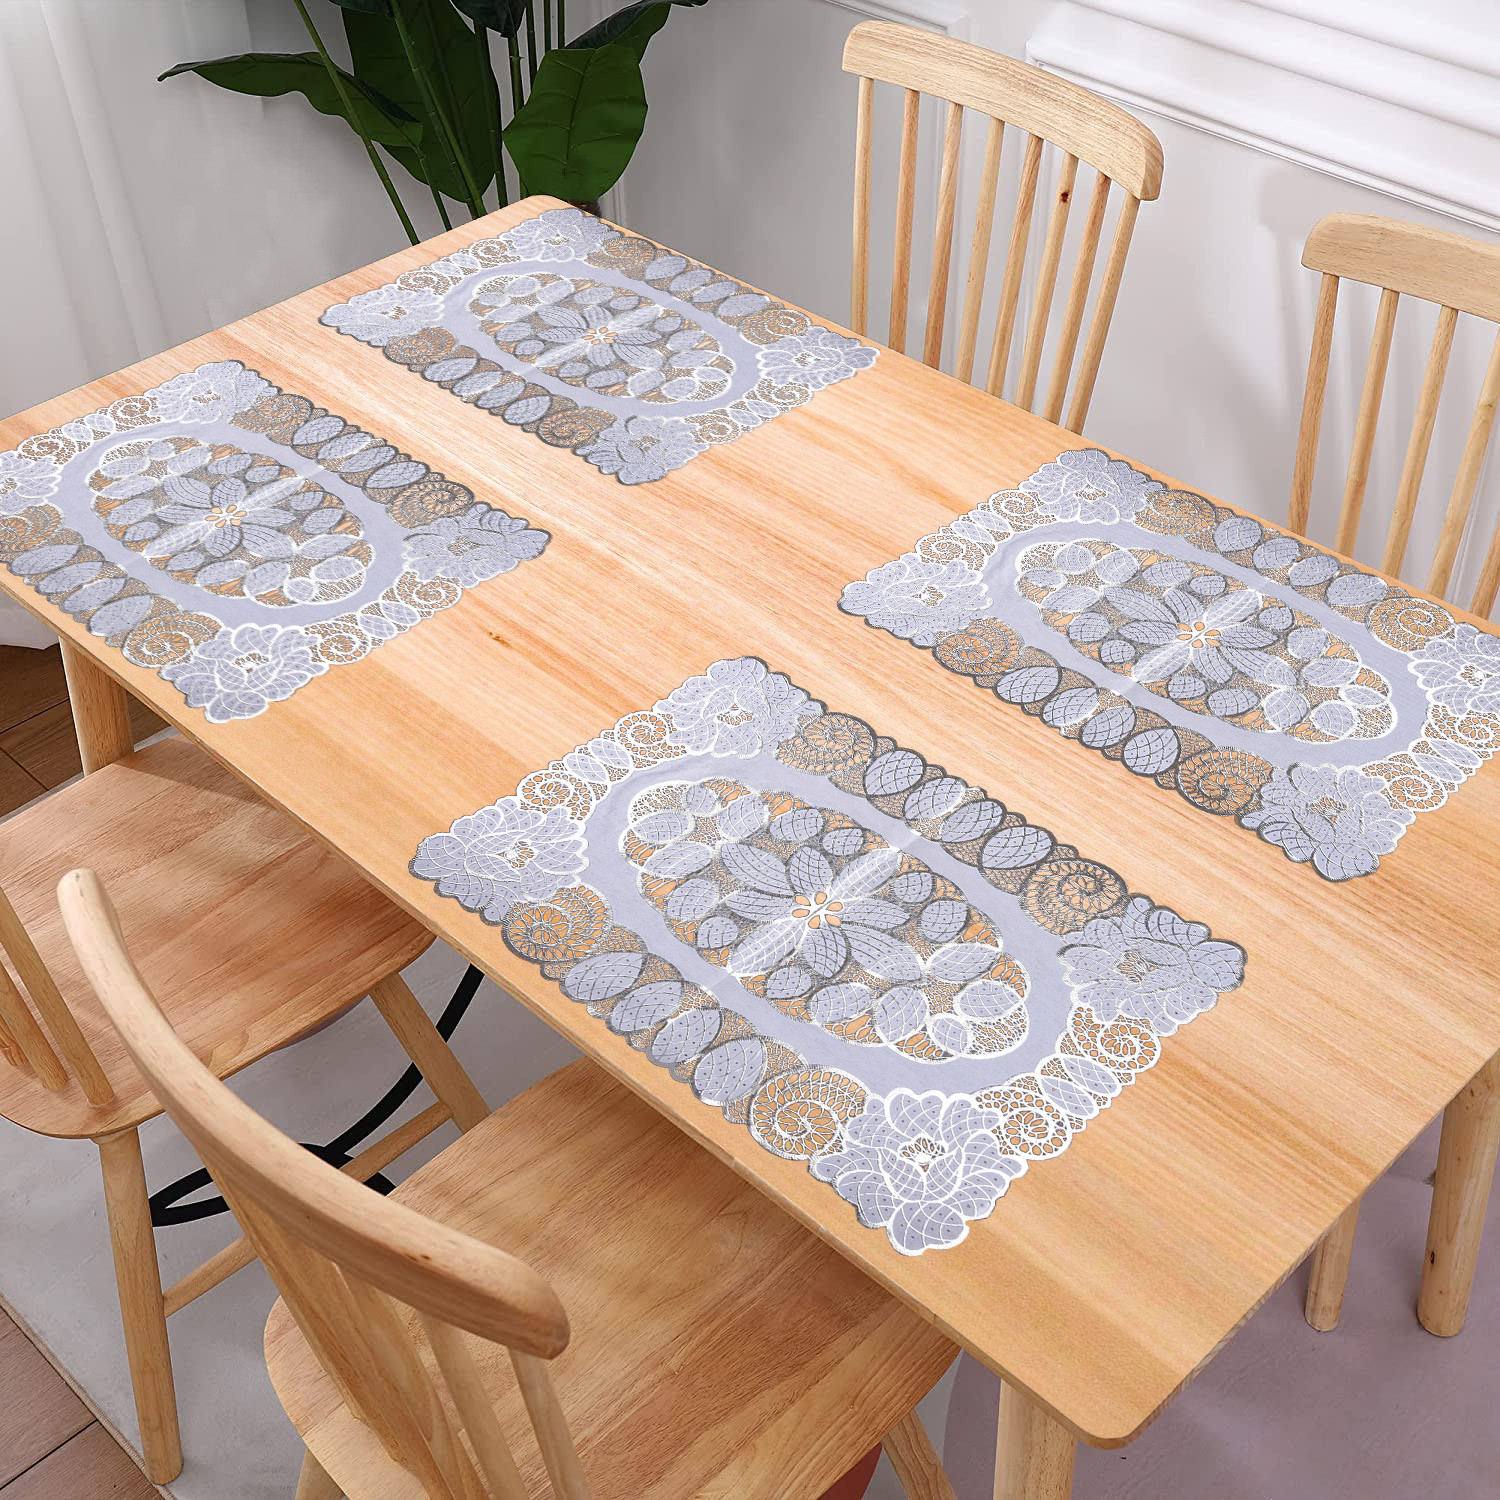 Kuber Industries Placemat | Placemats for Dining Room | Designer Table Mat Set | Placemats for Kitchen | Side Placemats | Table Placemat Set | Medium 14x20 | Silver